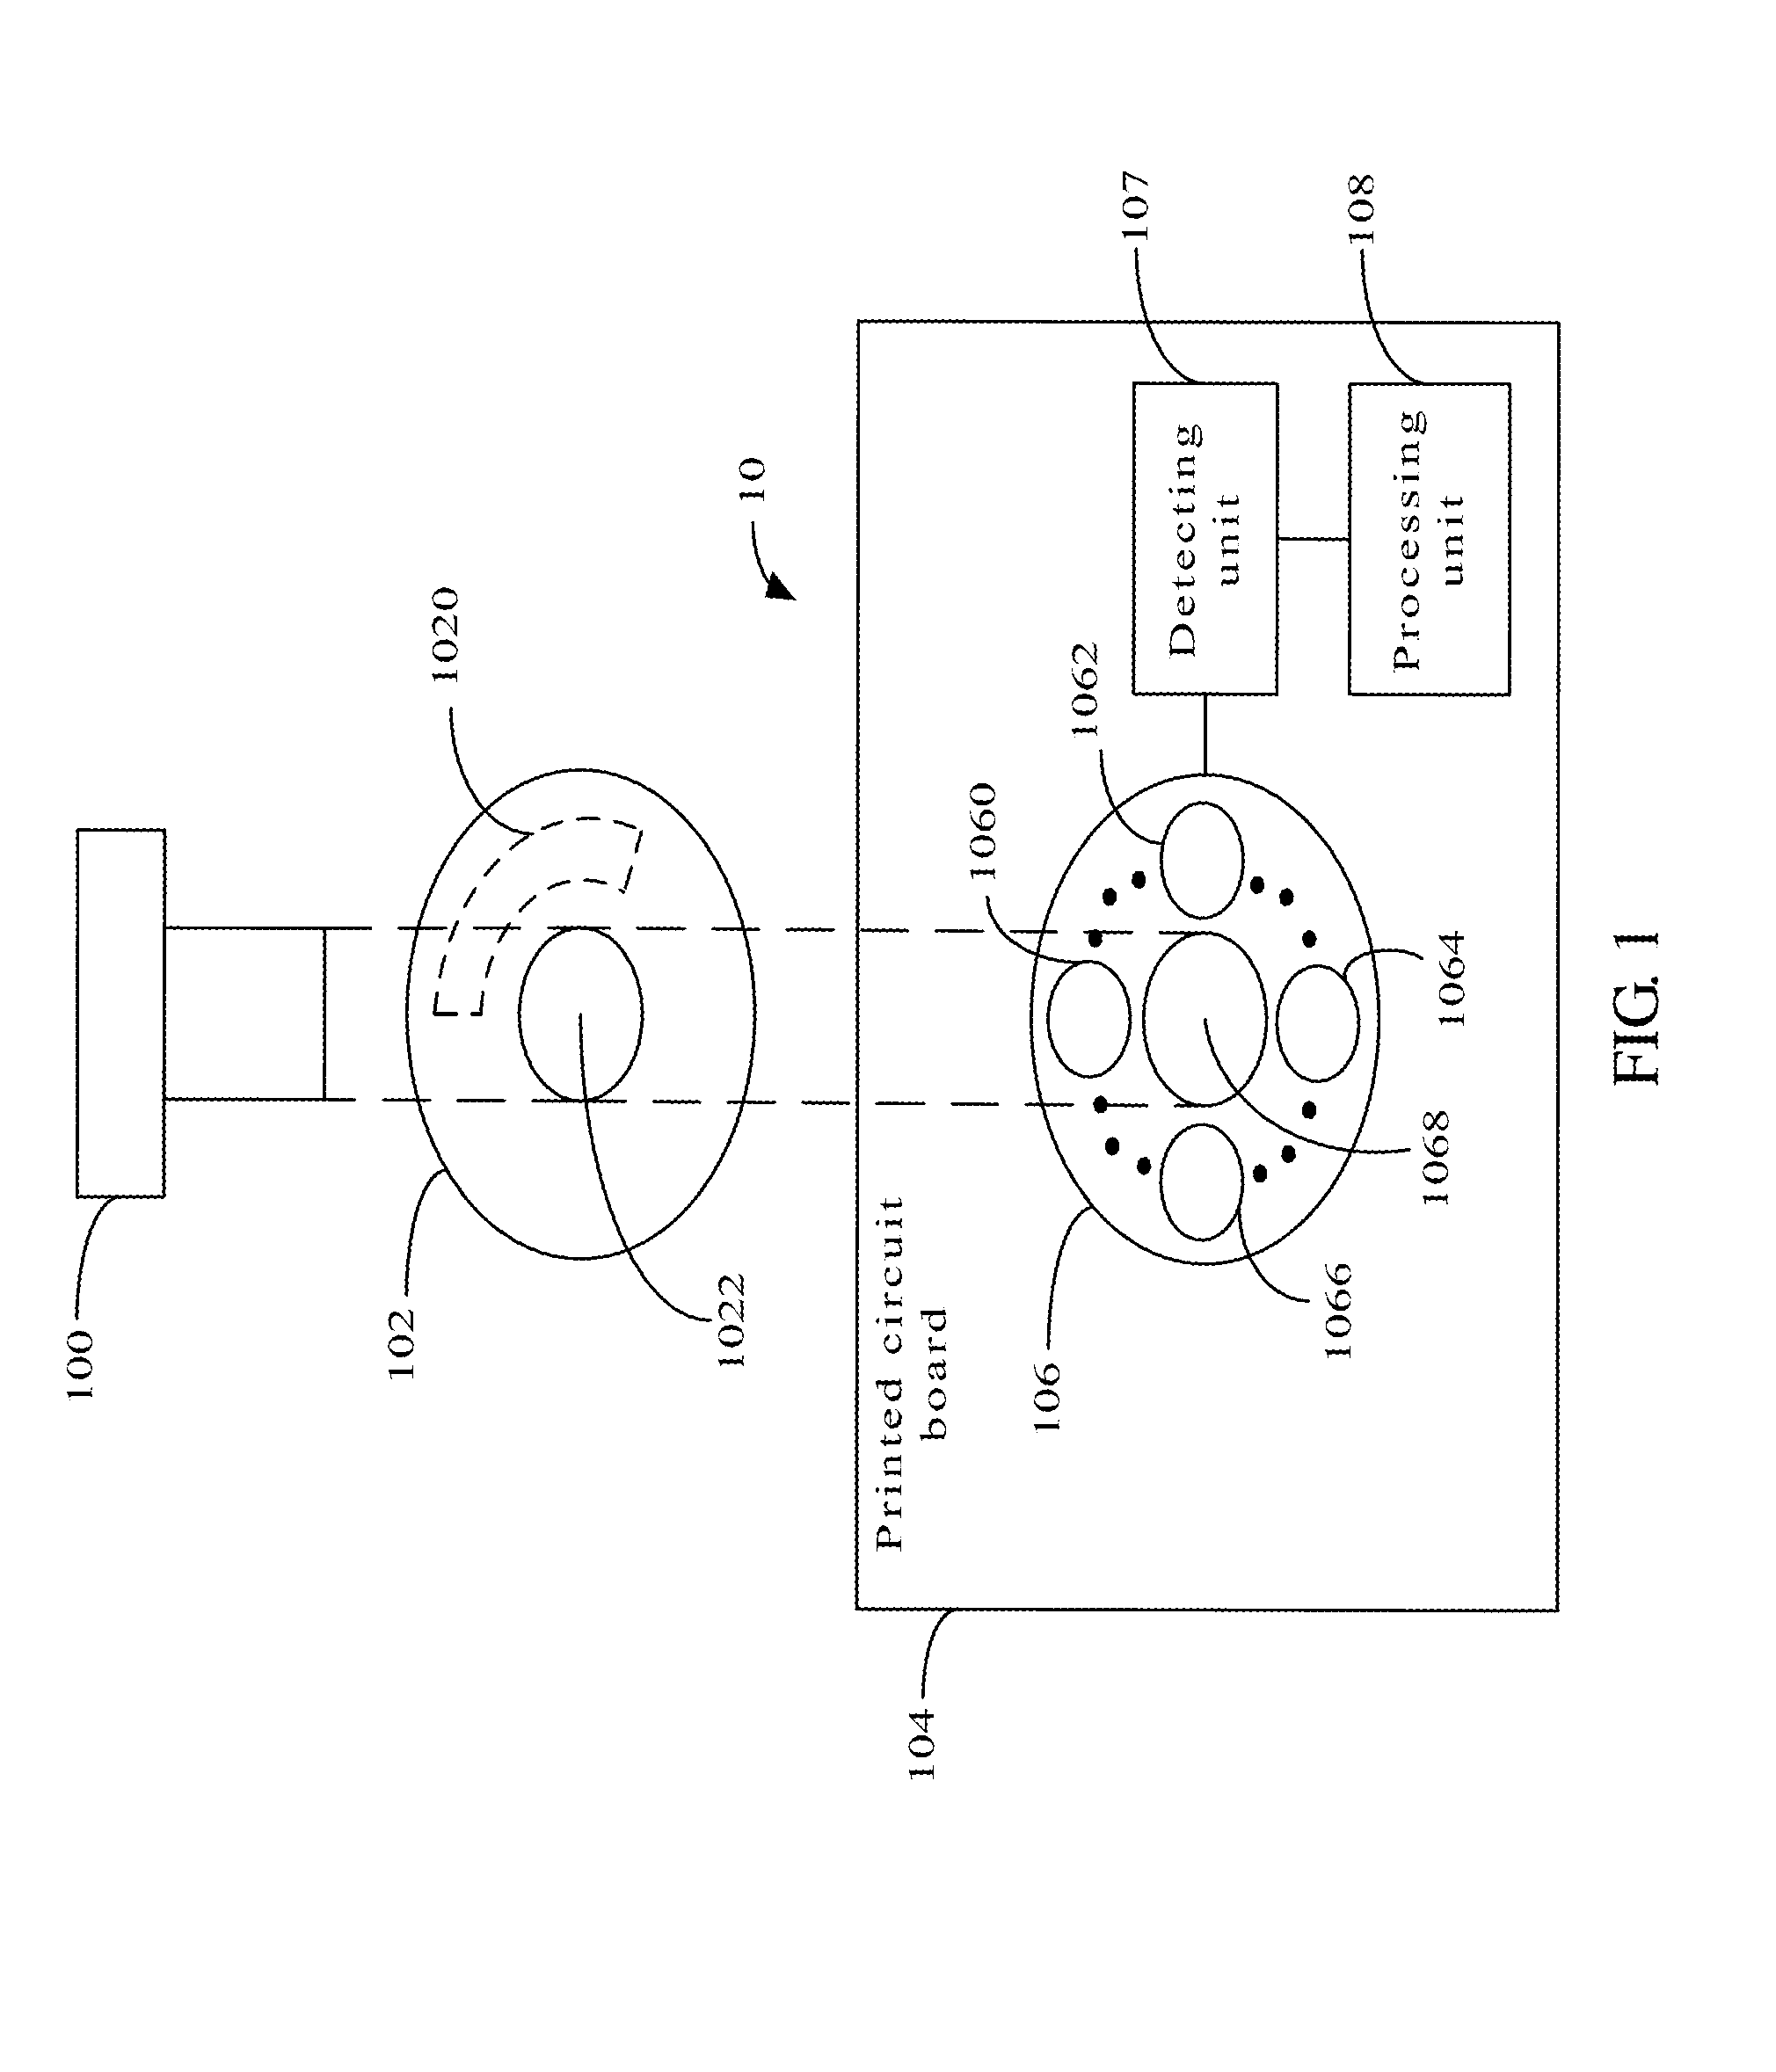 Electronic device using data theft protection